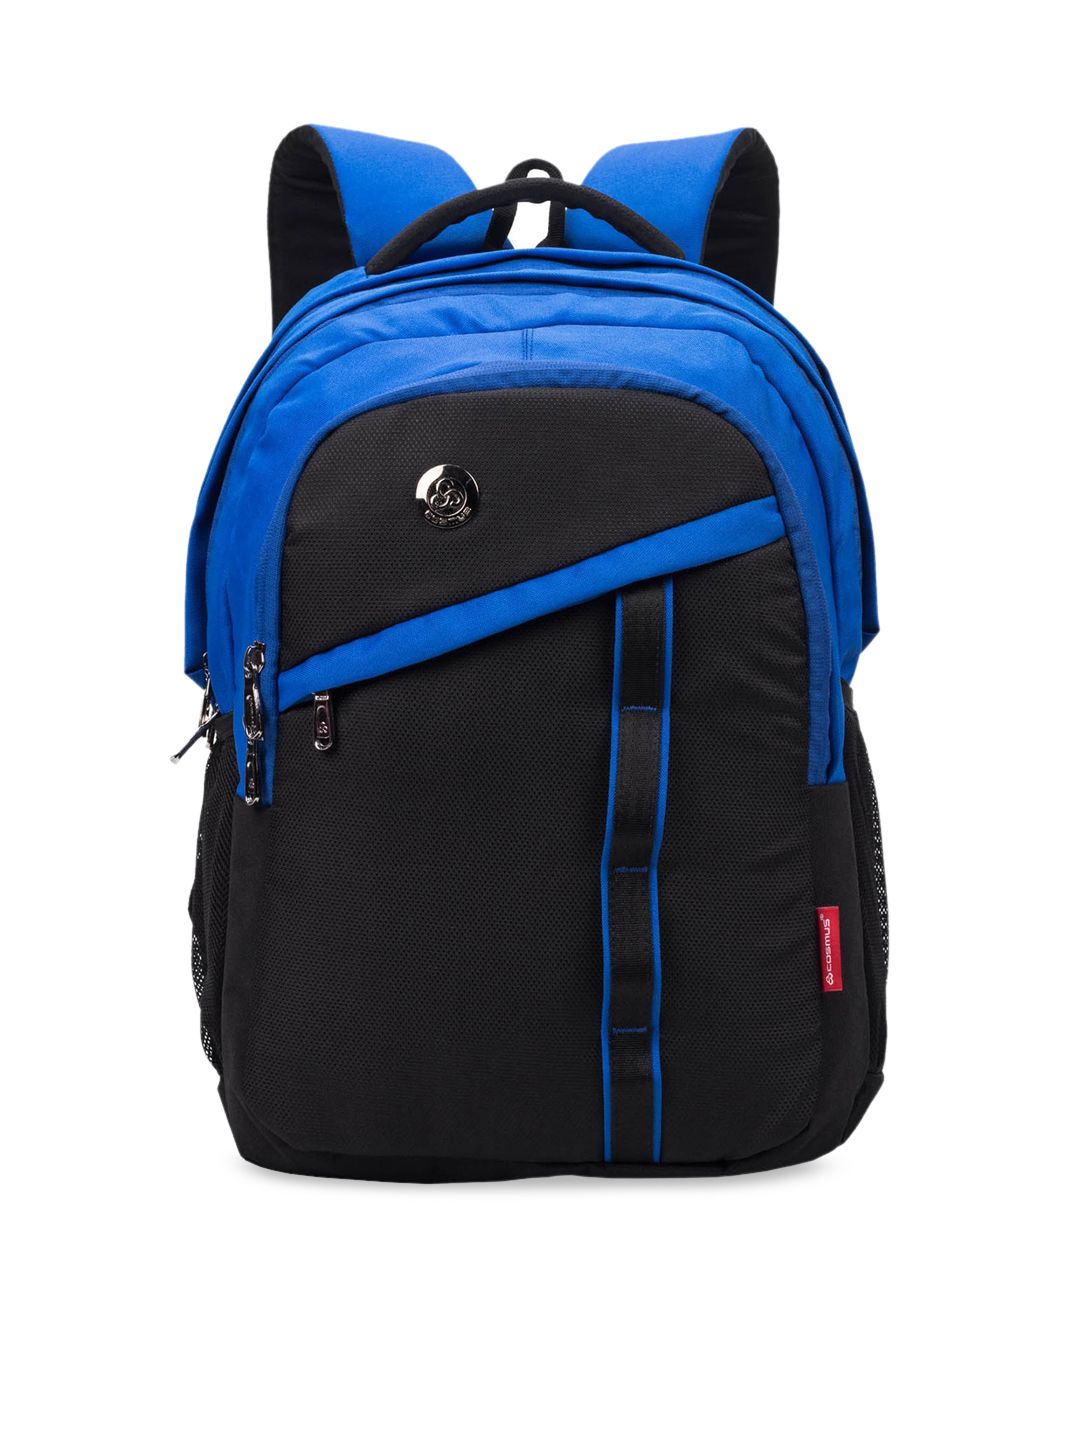 COSMUS Unisex Black & Blue Solid Backpack Price in India